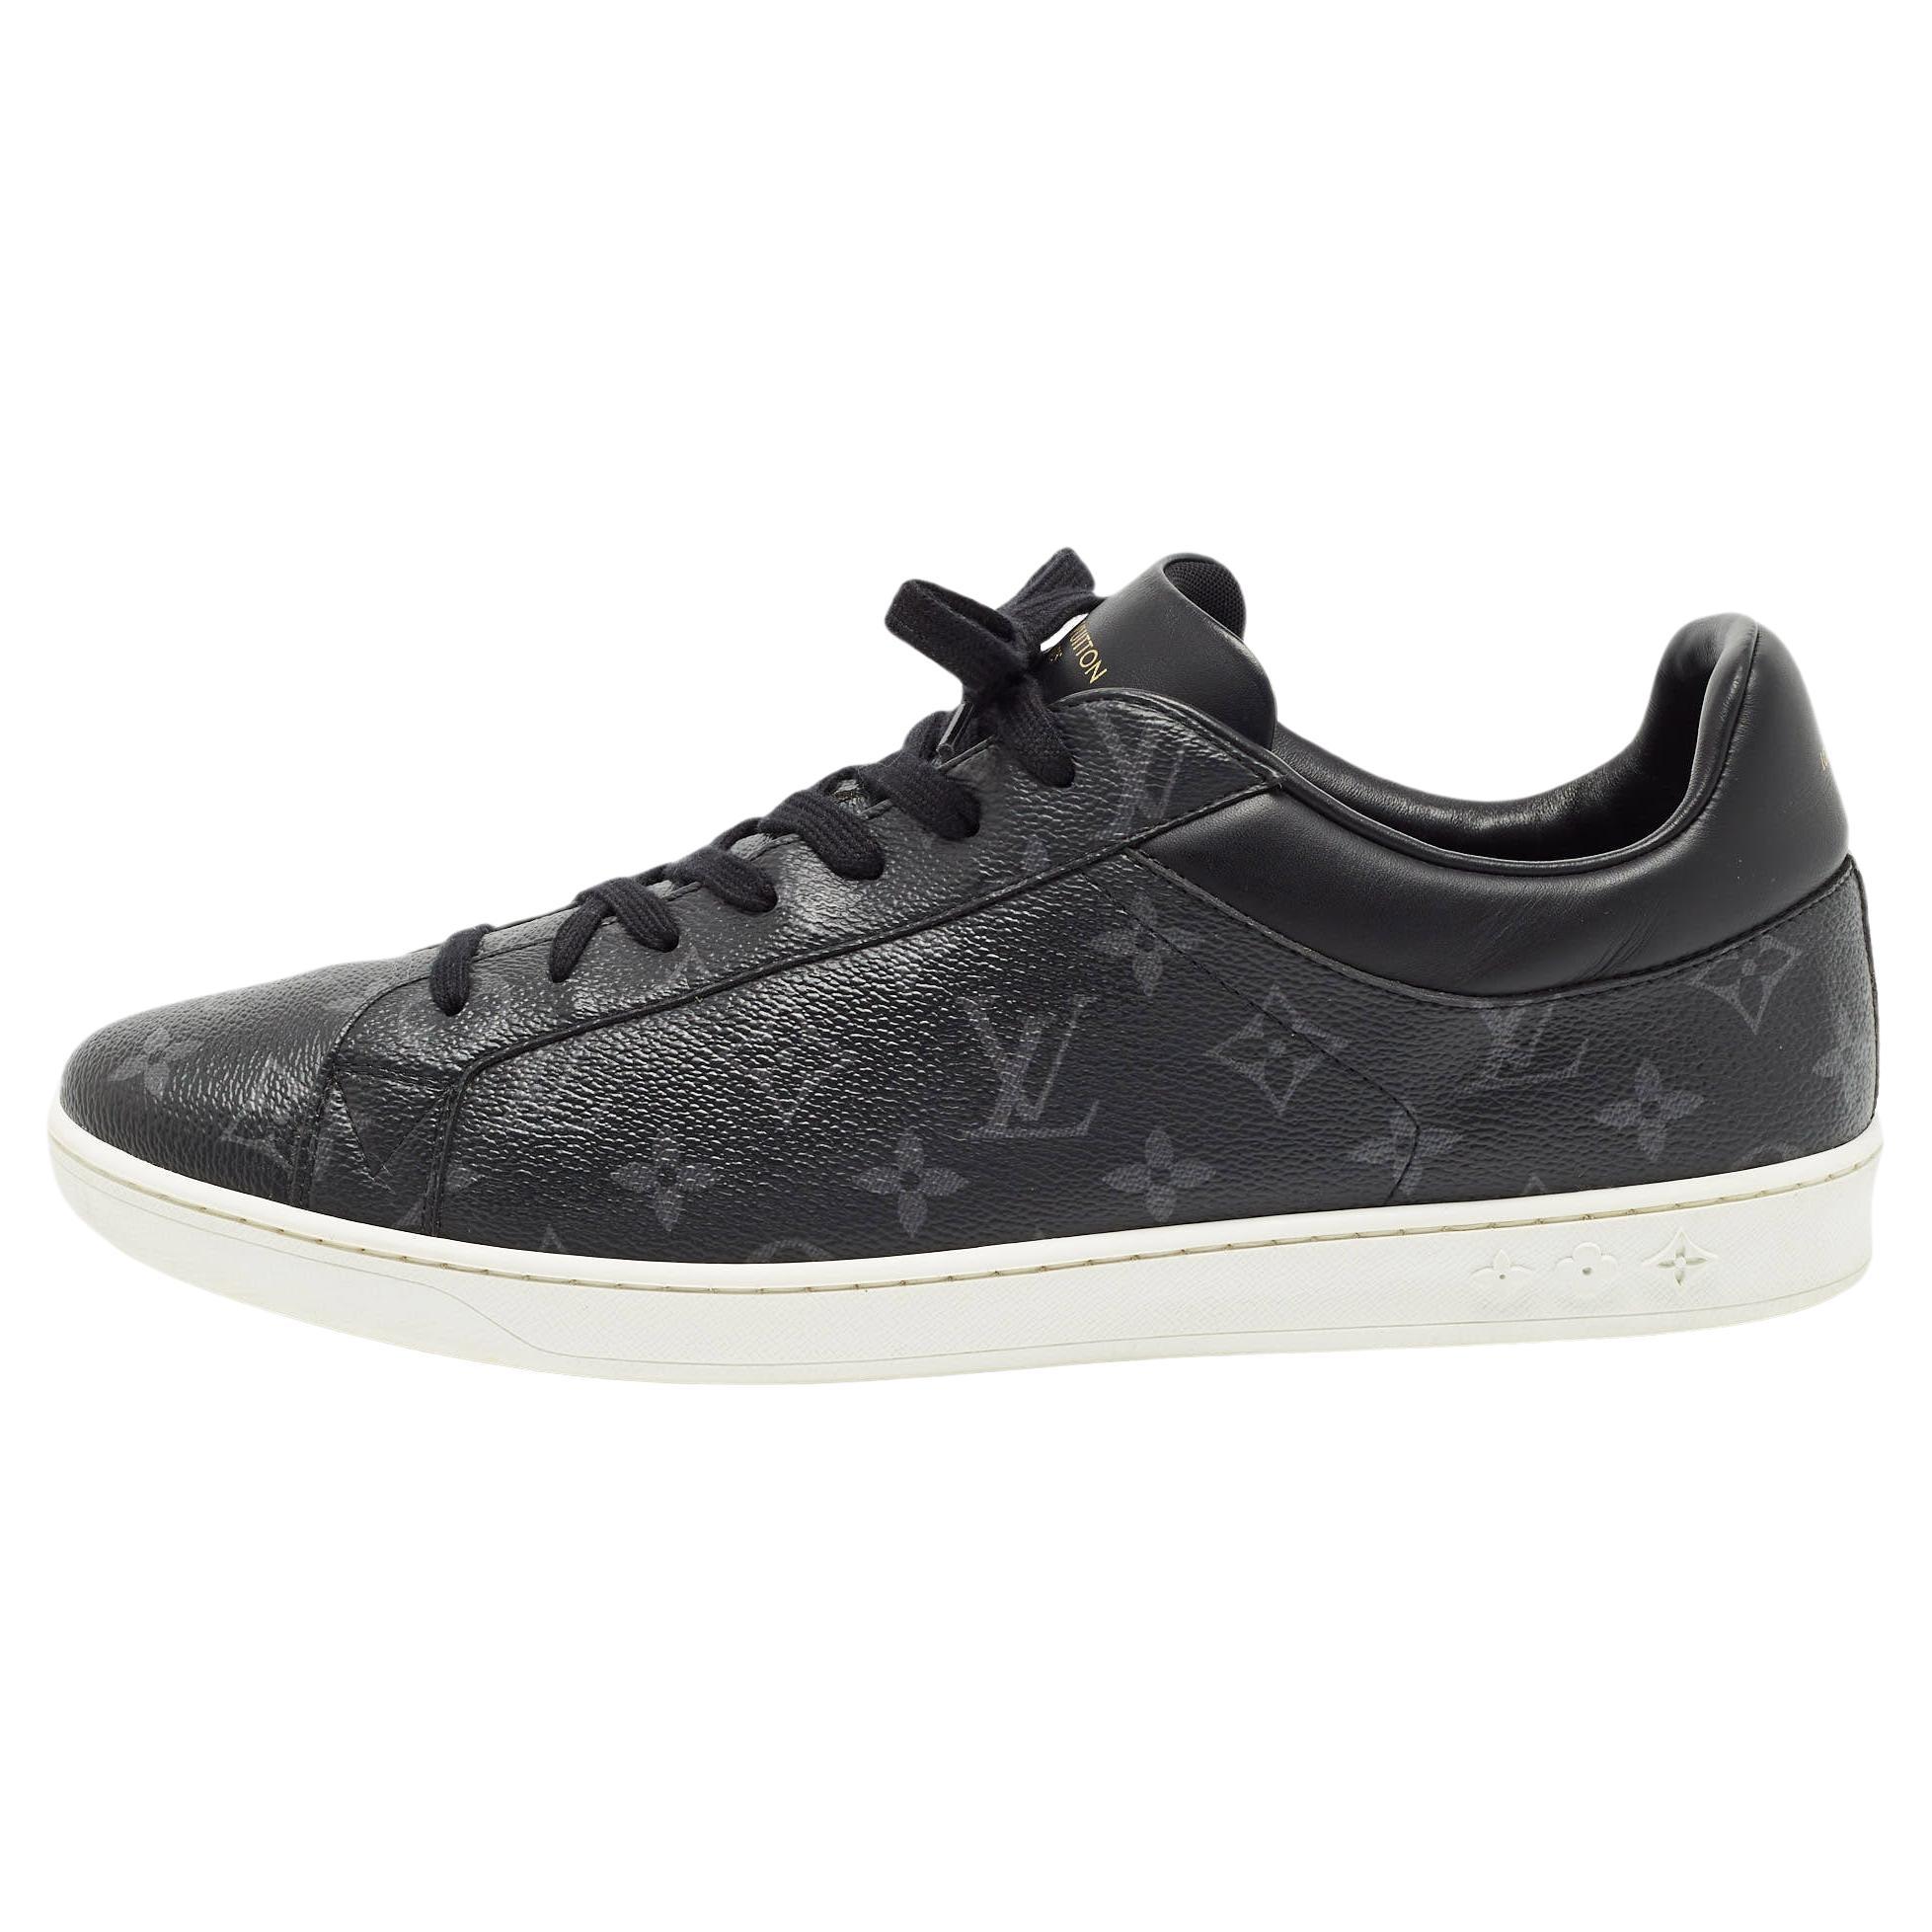 Louis Vuitton Monogram Eclipse Luxembourg Sneakers Size 46